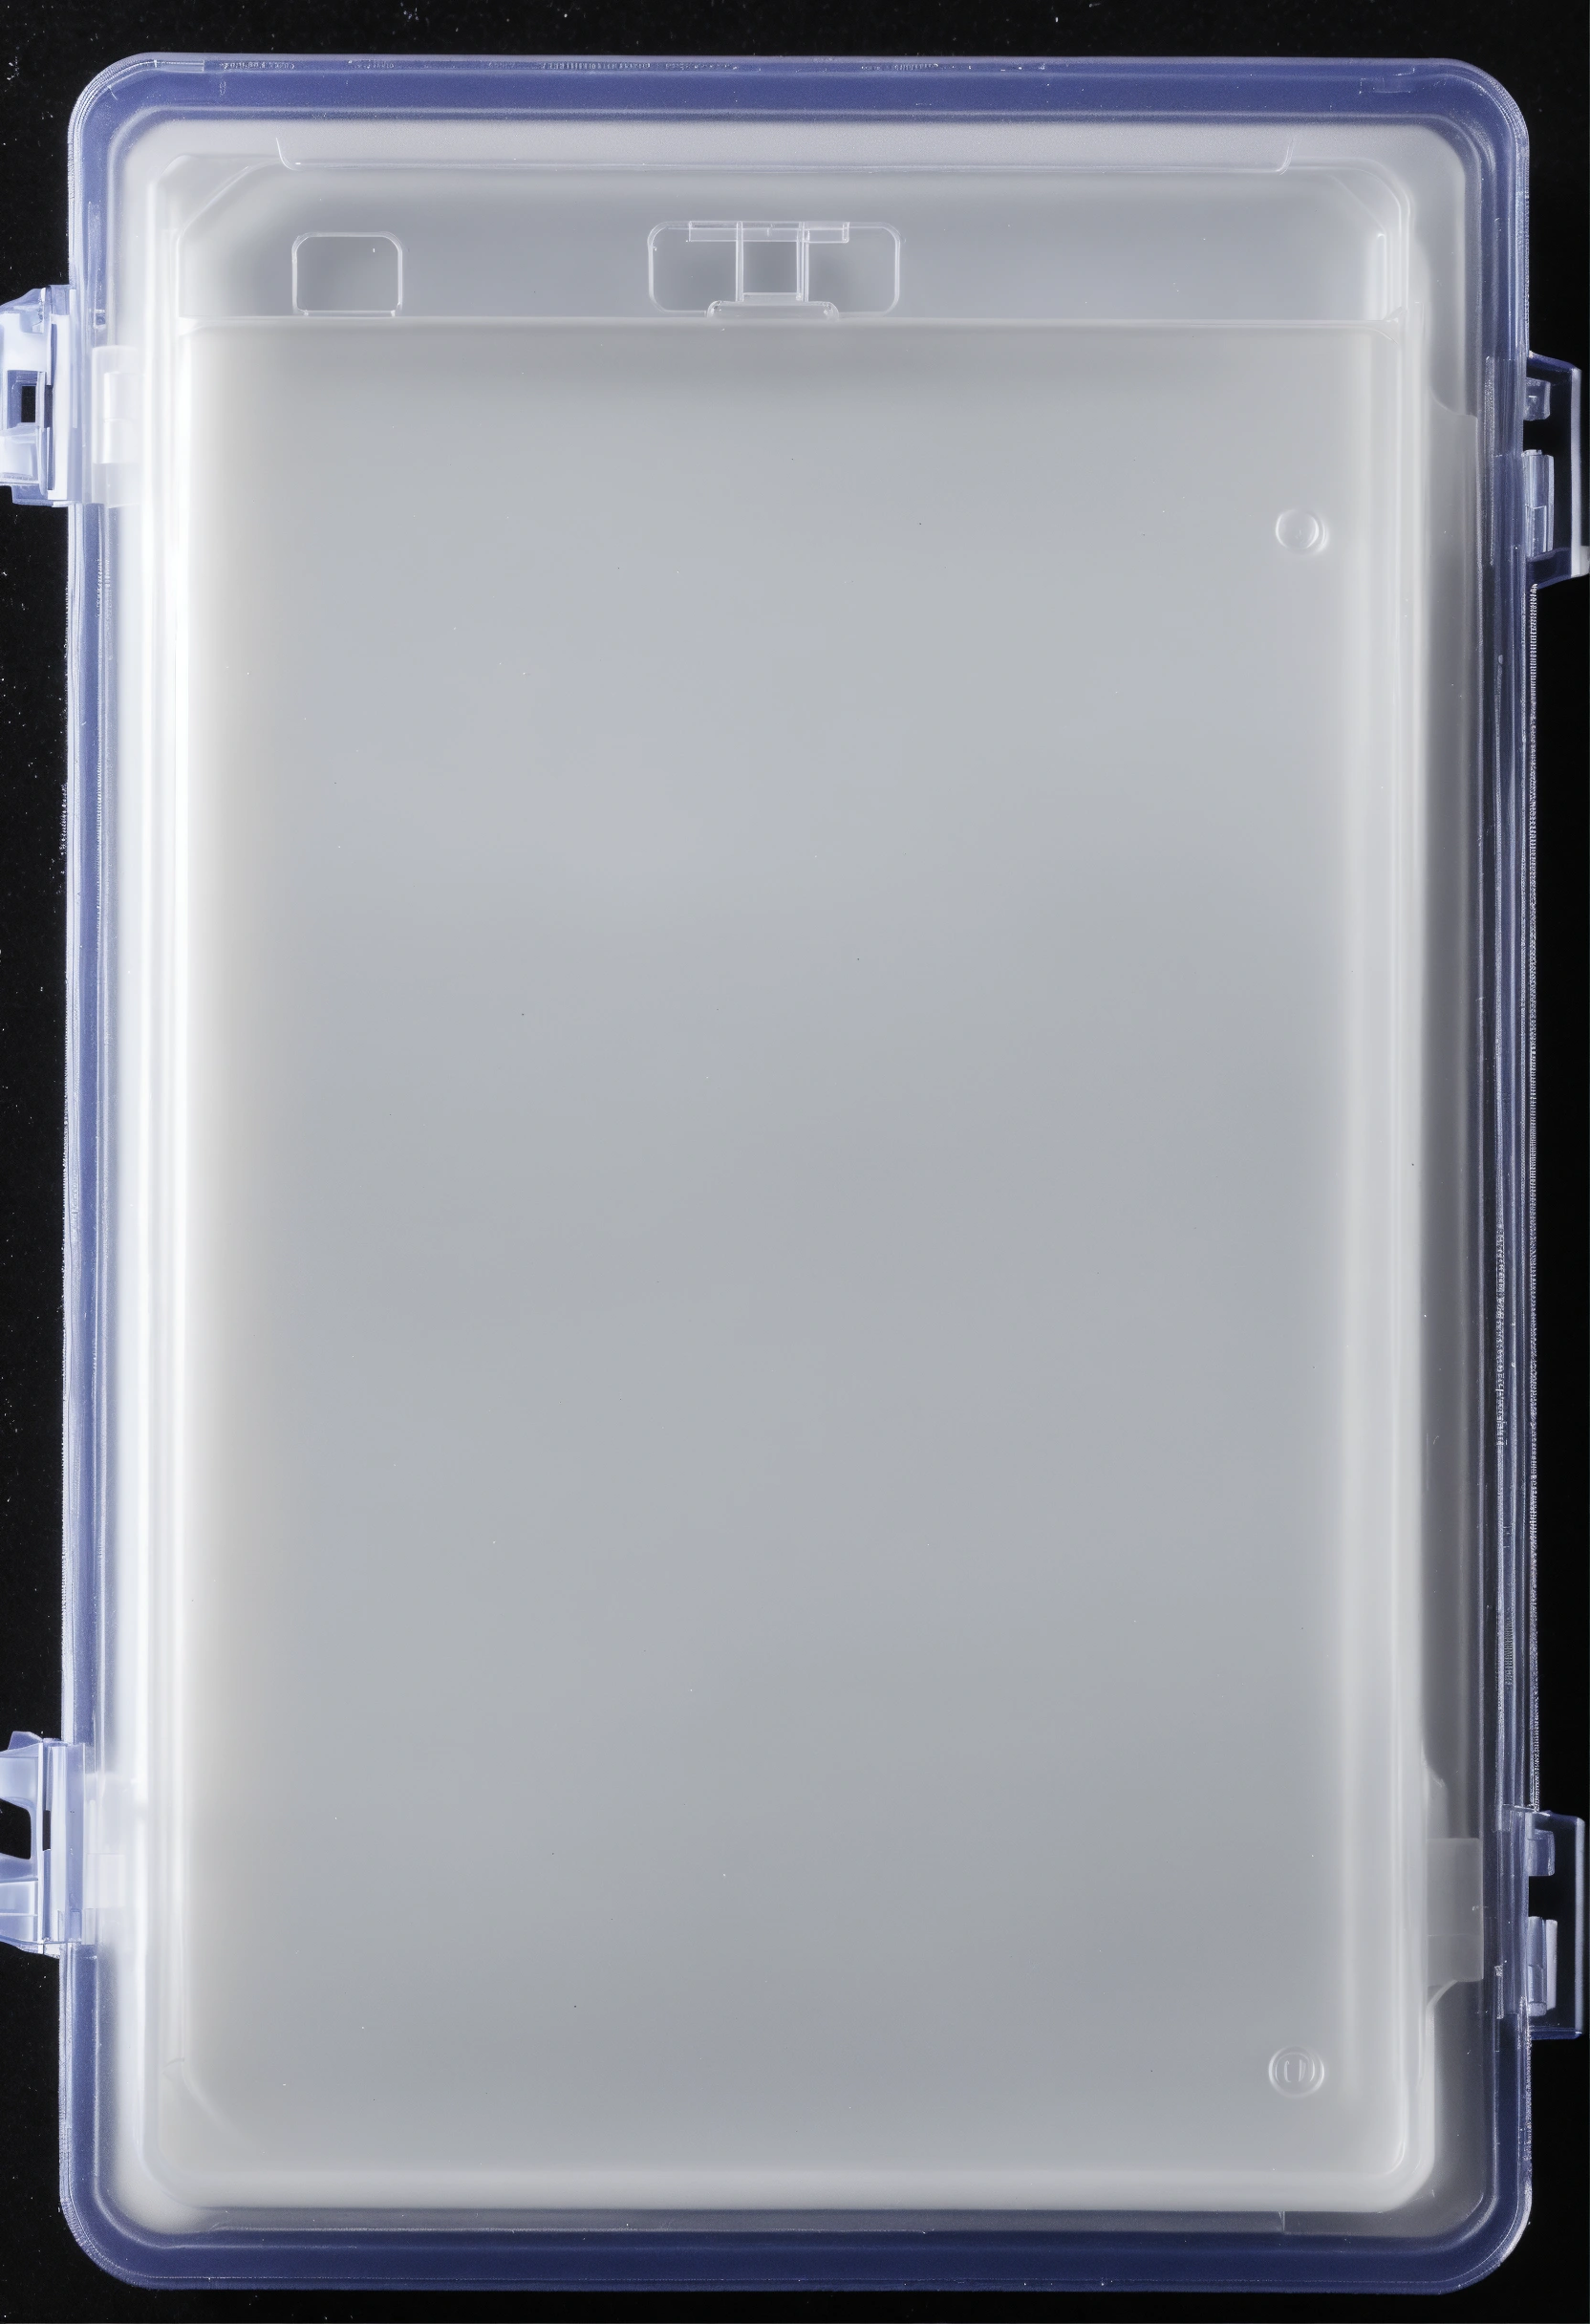 Lexica - (((Blank white))) a picture of a PVC tcg plastic casing ...